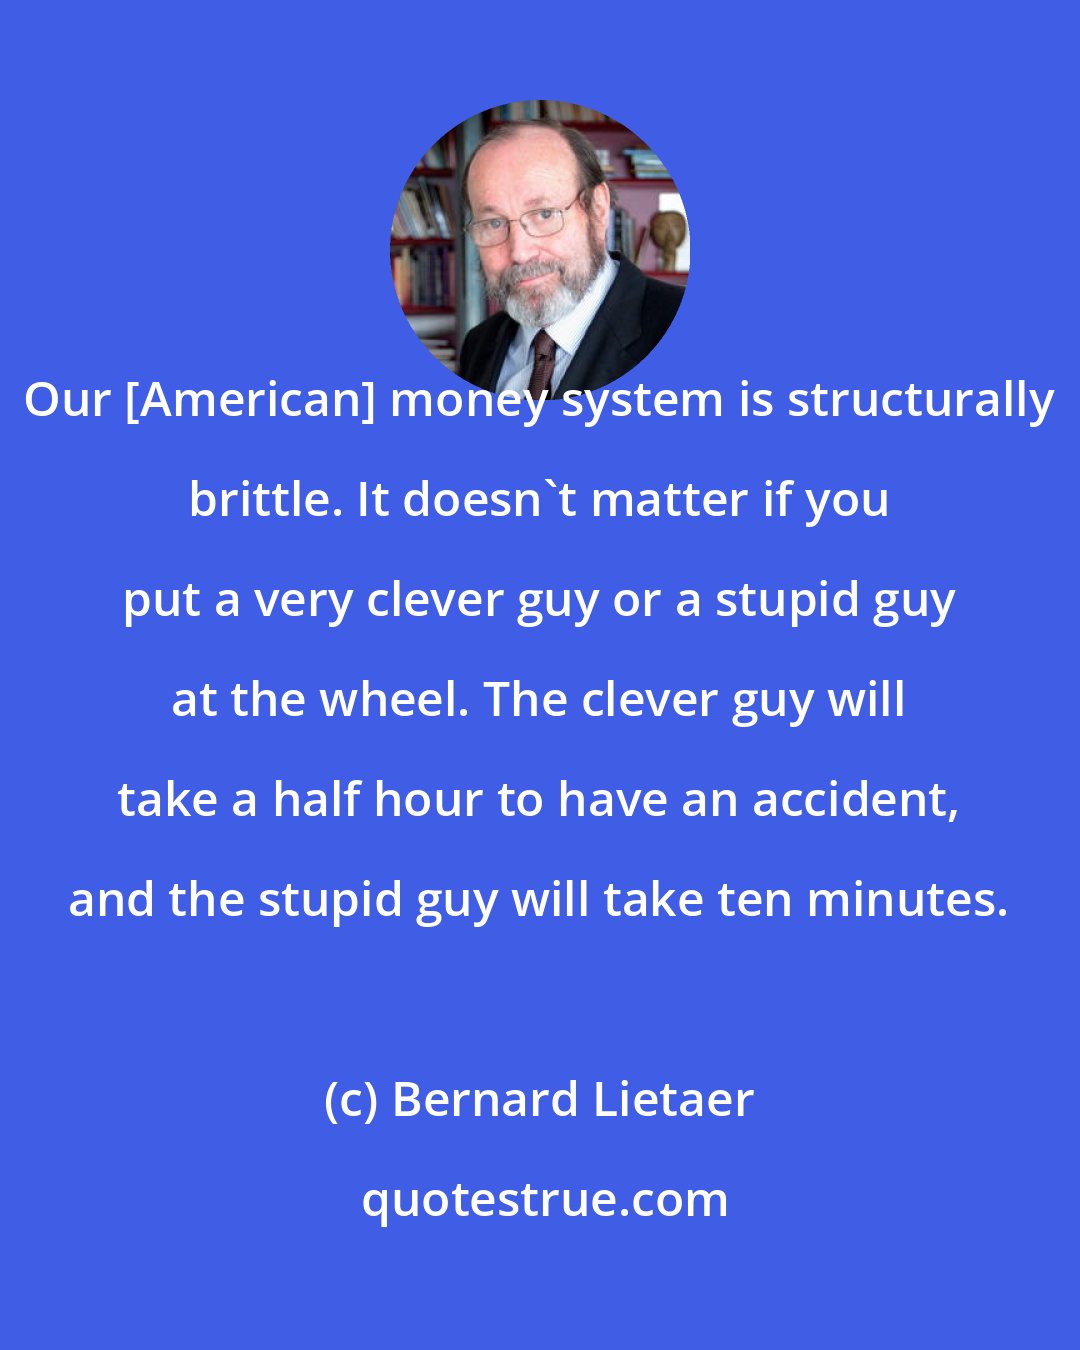 Bernard Lietaer: Our [American] money system is structurally brittle. It doesn't matter if you put a very clever guy or a stupid guy at the wheel. The clever guy will take a half hour to have an accident, and the stupid guy will take ten minutes.